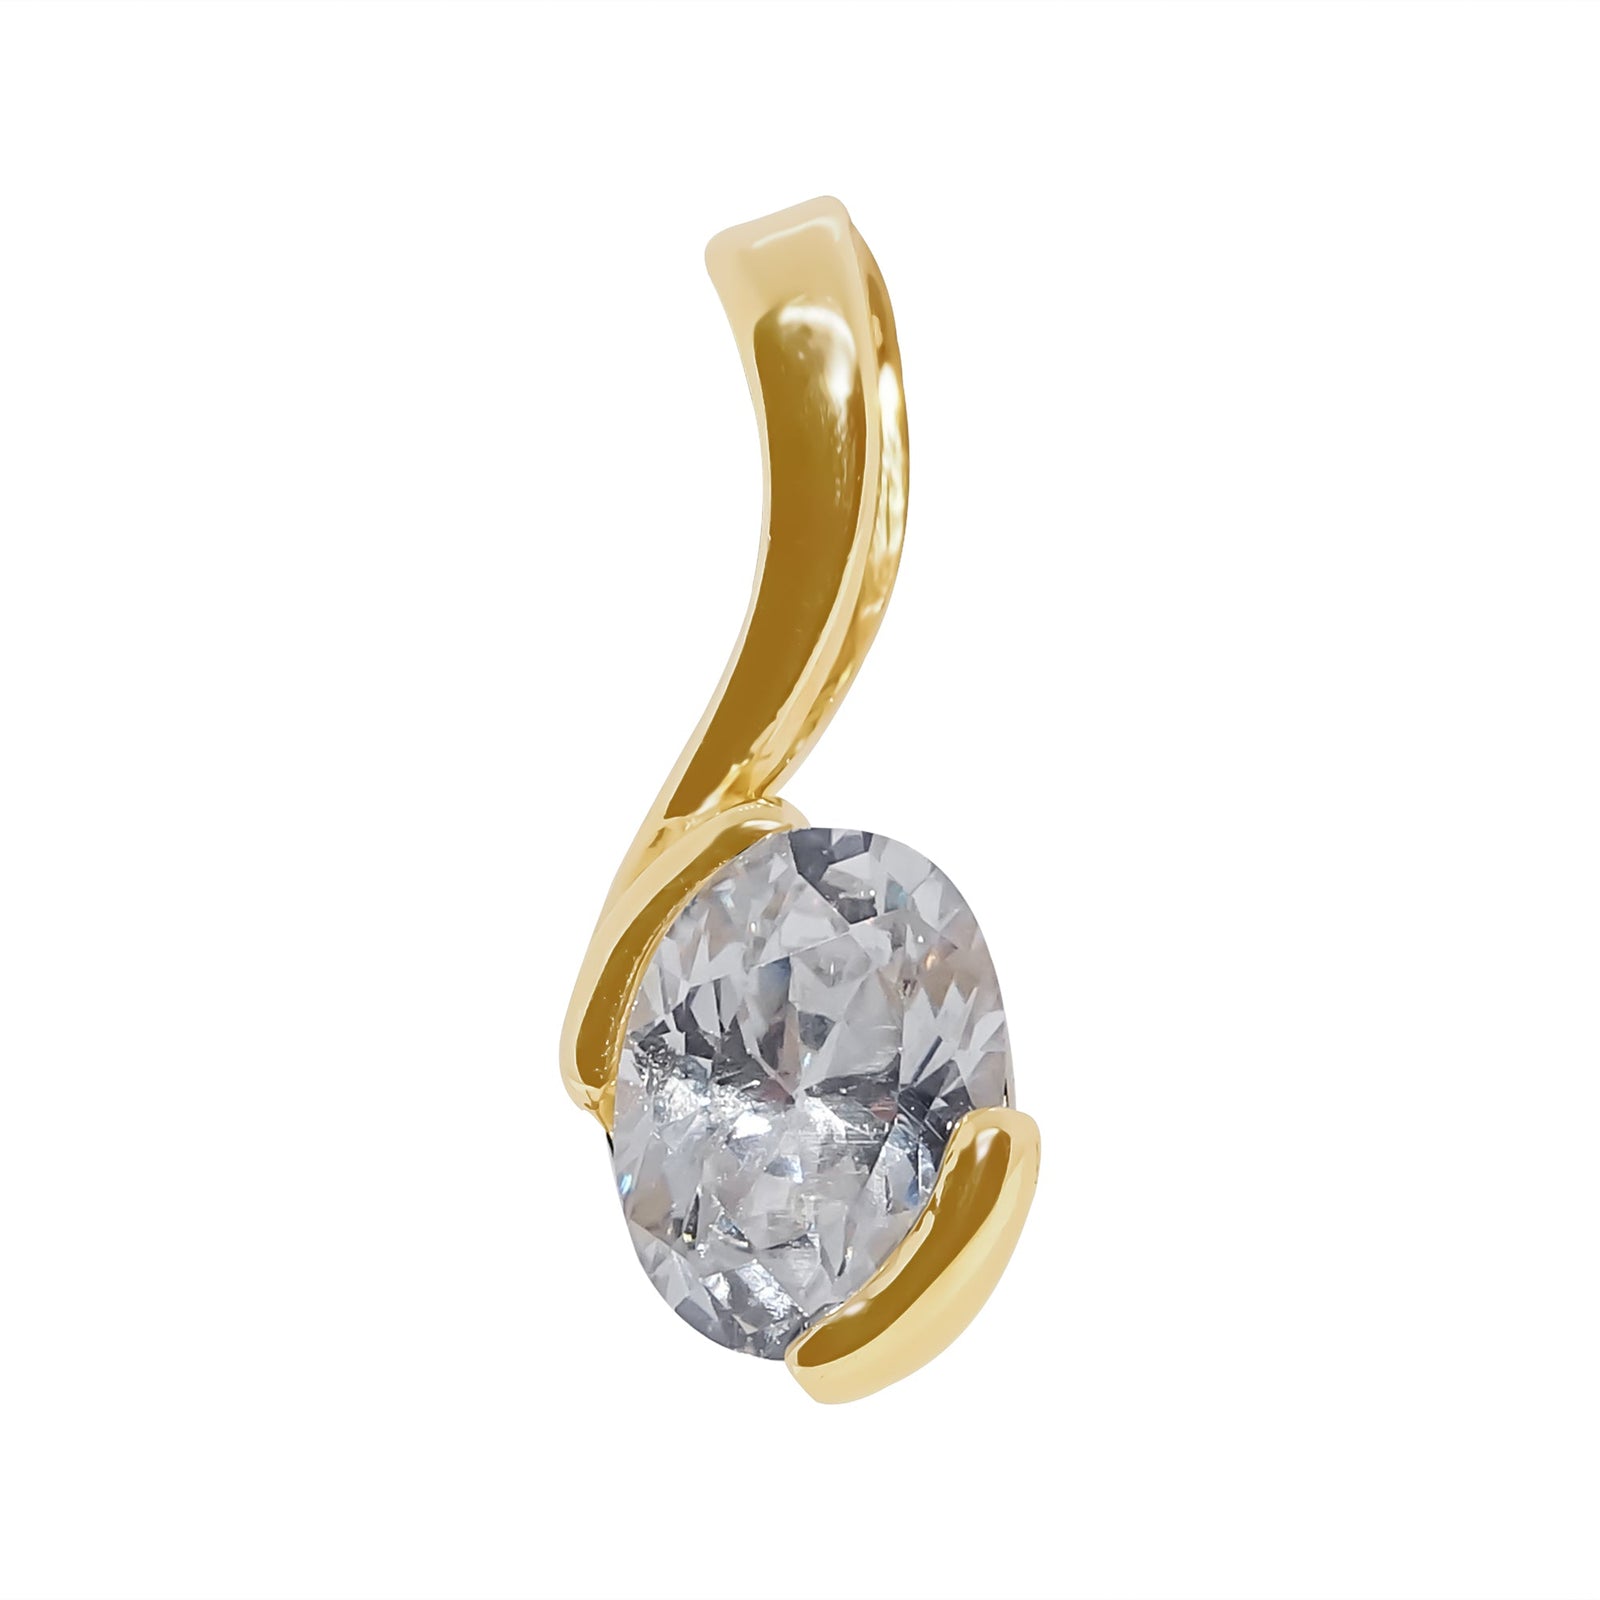 9ct gold 7x5mm oval cz pendant